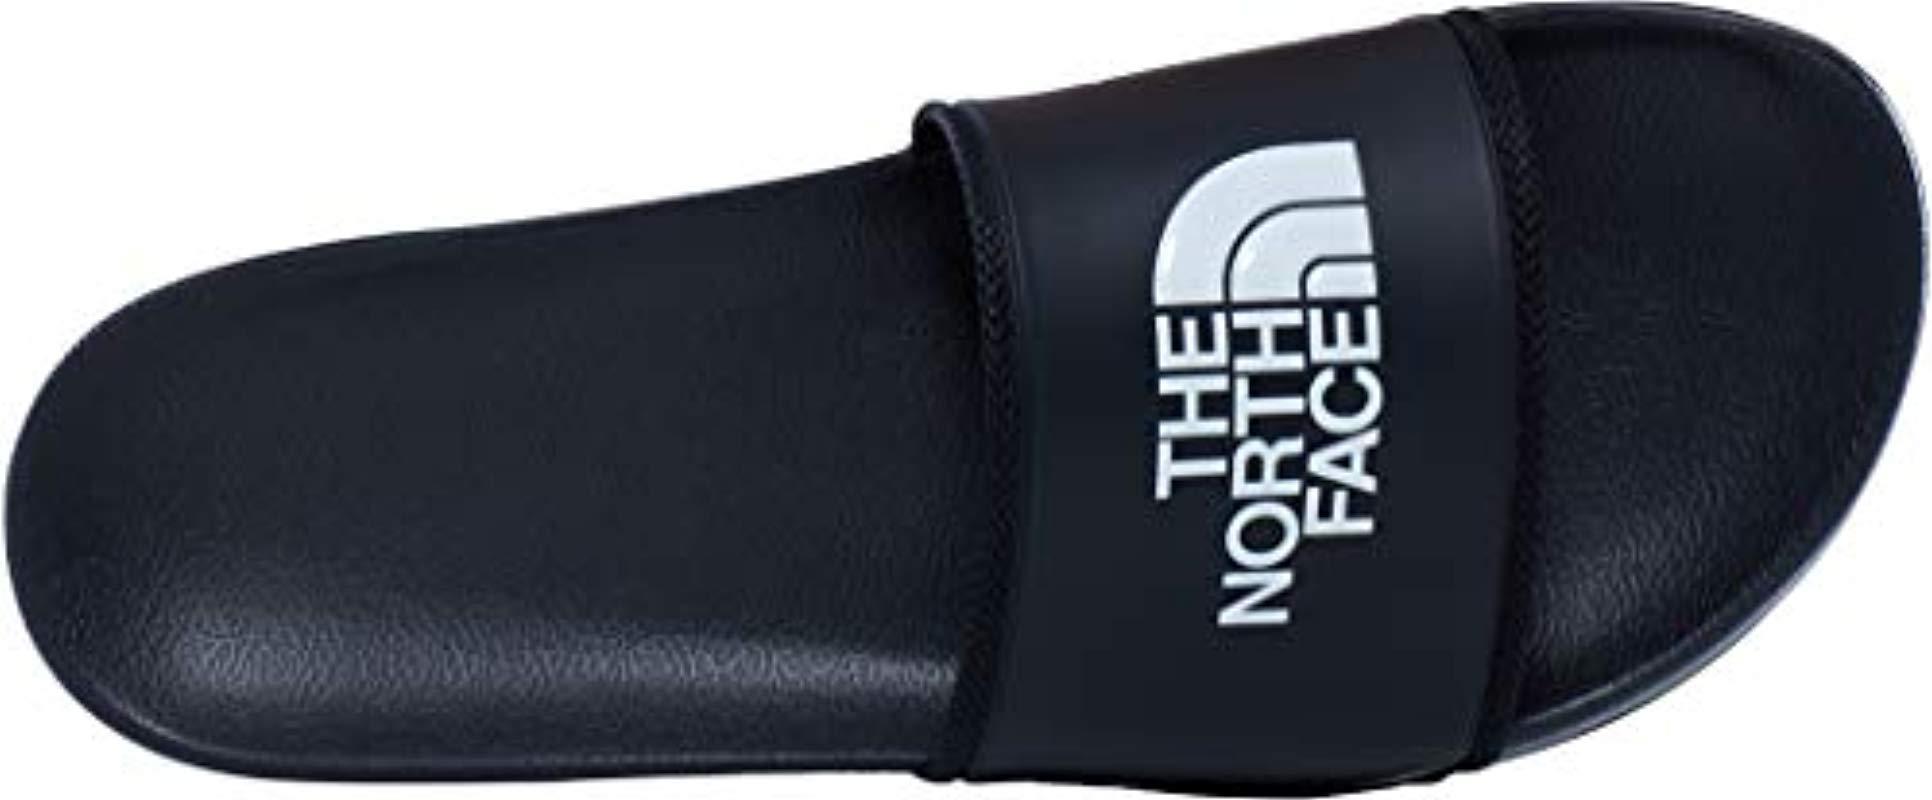 mens slippers north face